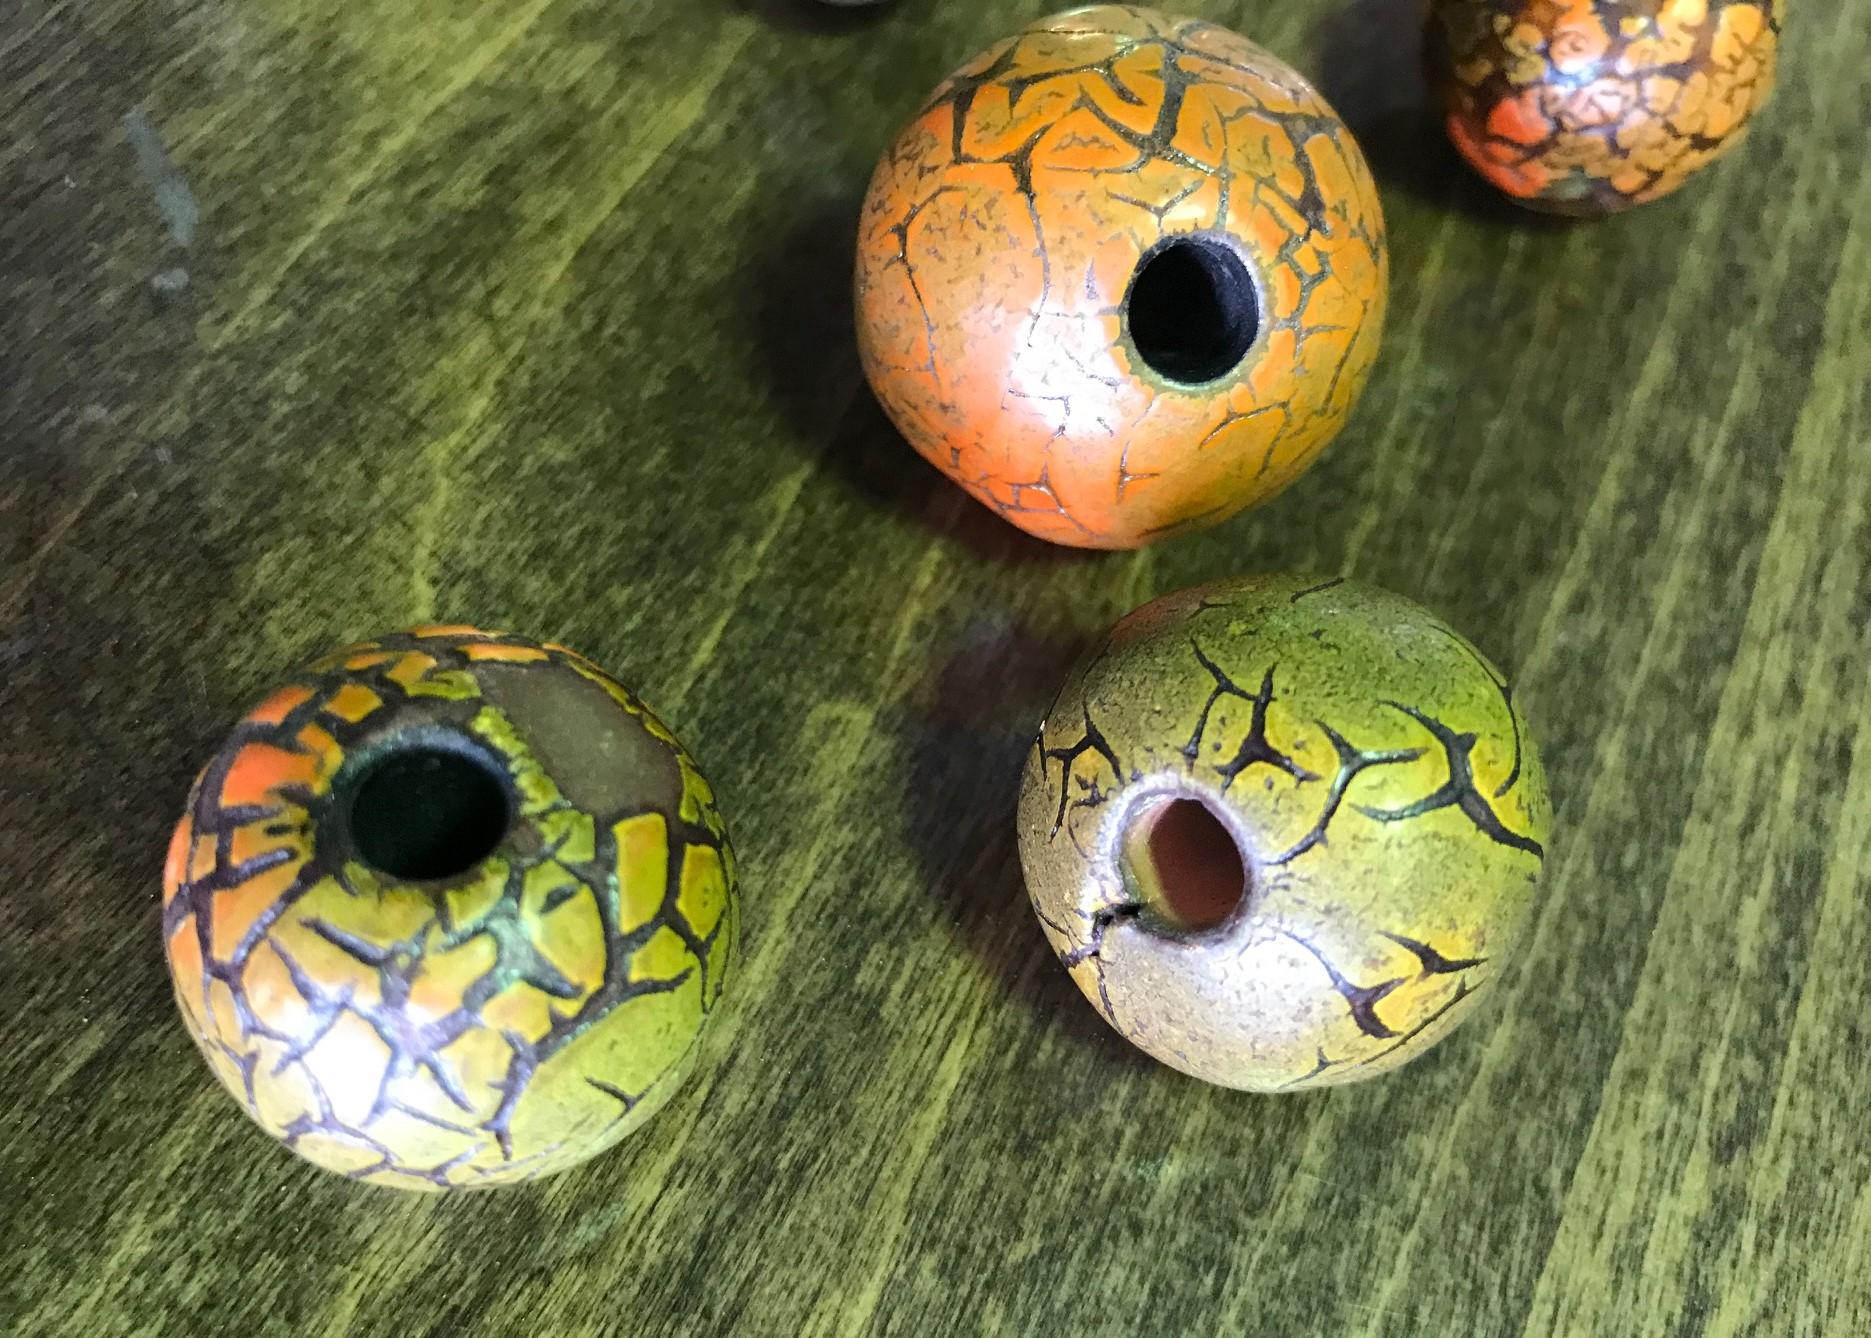 A beautifully glazed set of 5 multicolored ceramic beads by famed midcentury American artist/potter Doyle Lane. Lane was a glaze specialist much like Glen Lukens and Otto Natzler. His colorful glazes would melt, bubble and crack over his pieces